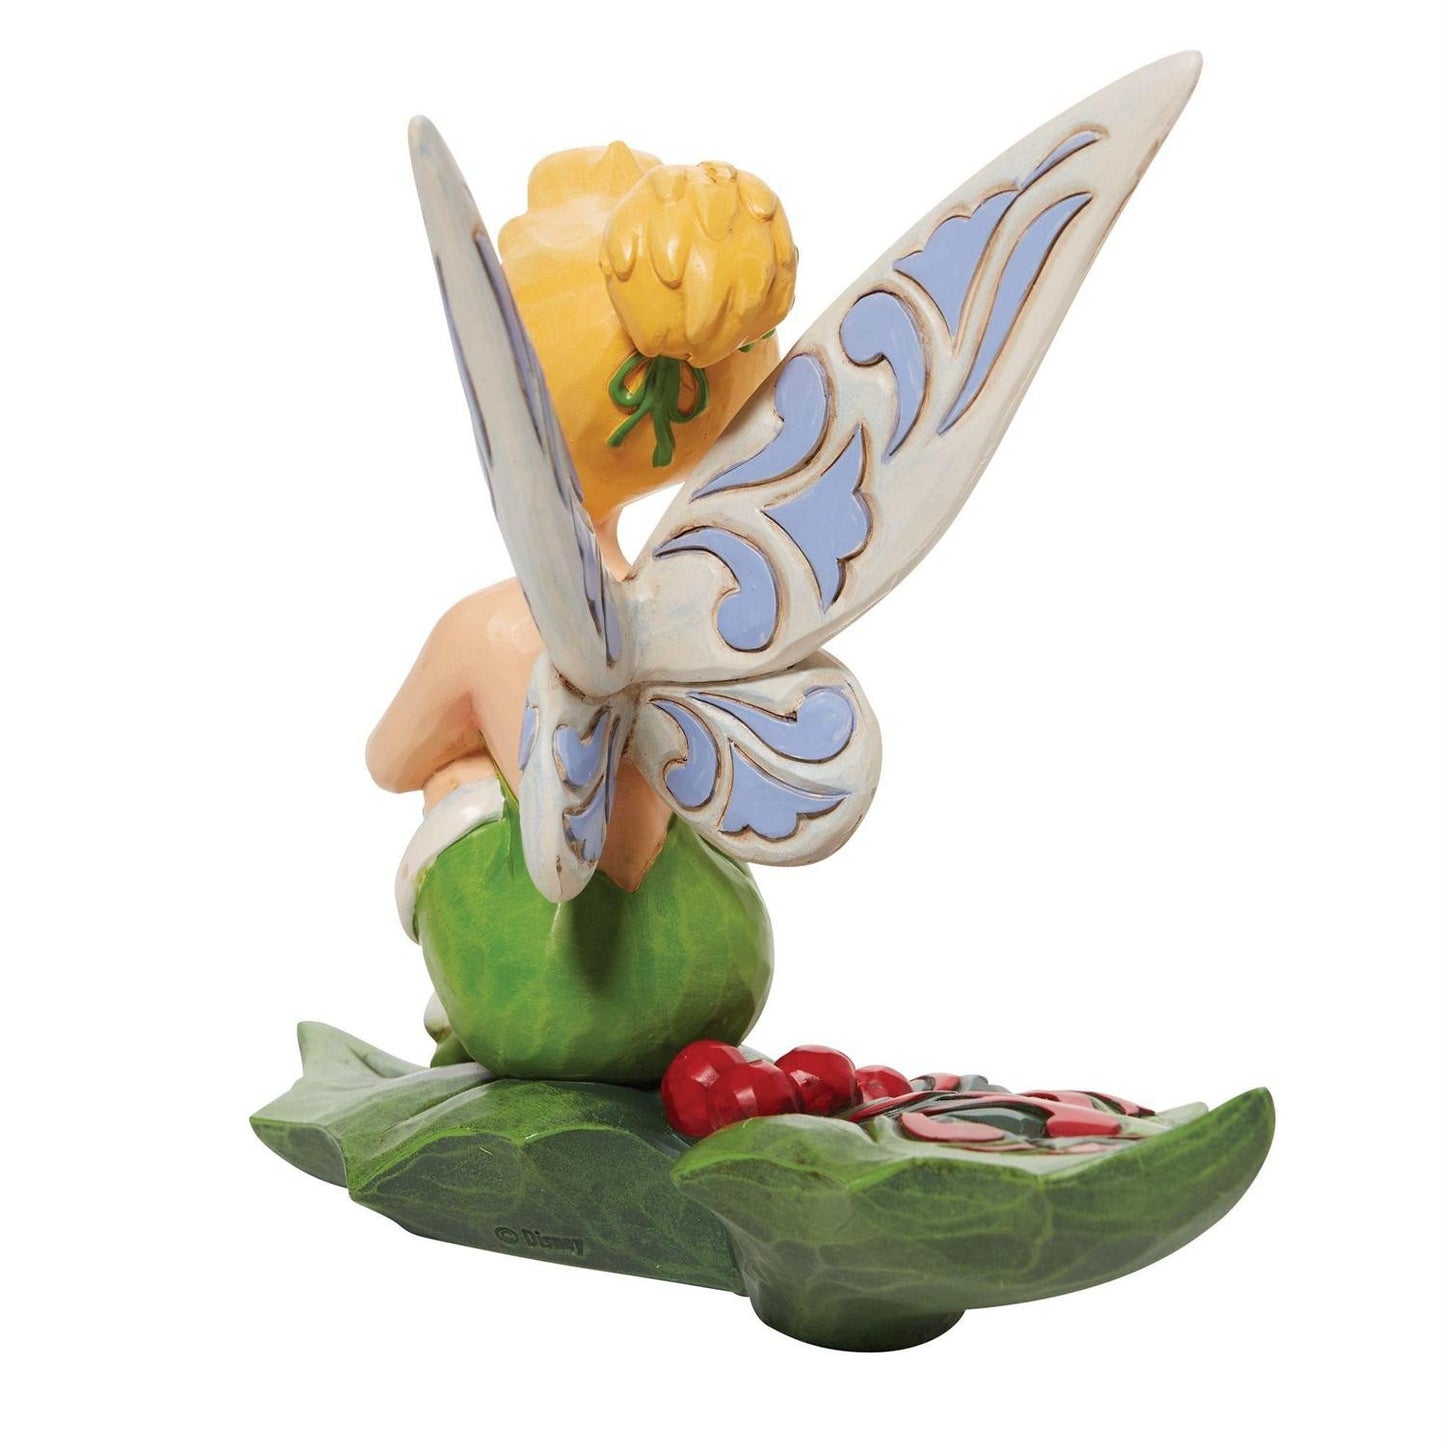 DISNEY TRADITIONS BY JIM SHORE CHRISTMAS TINKER BELL SITTING ON HOLLY 16CM